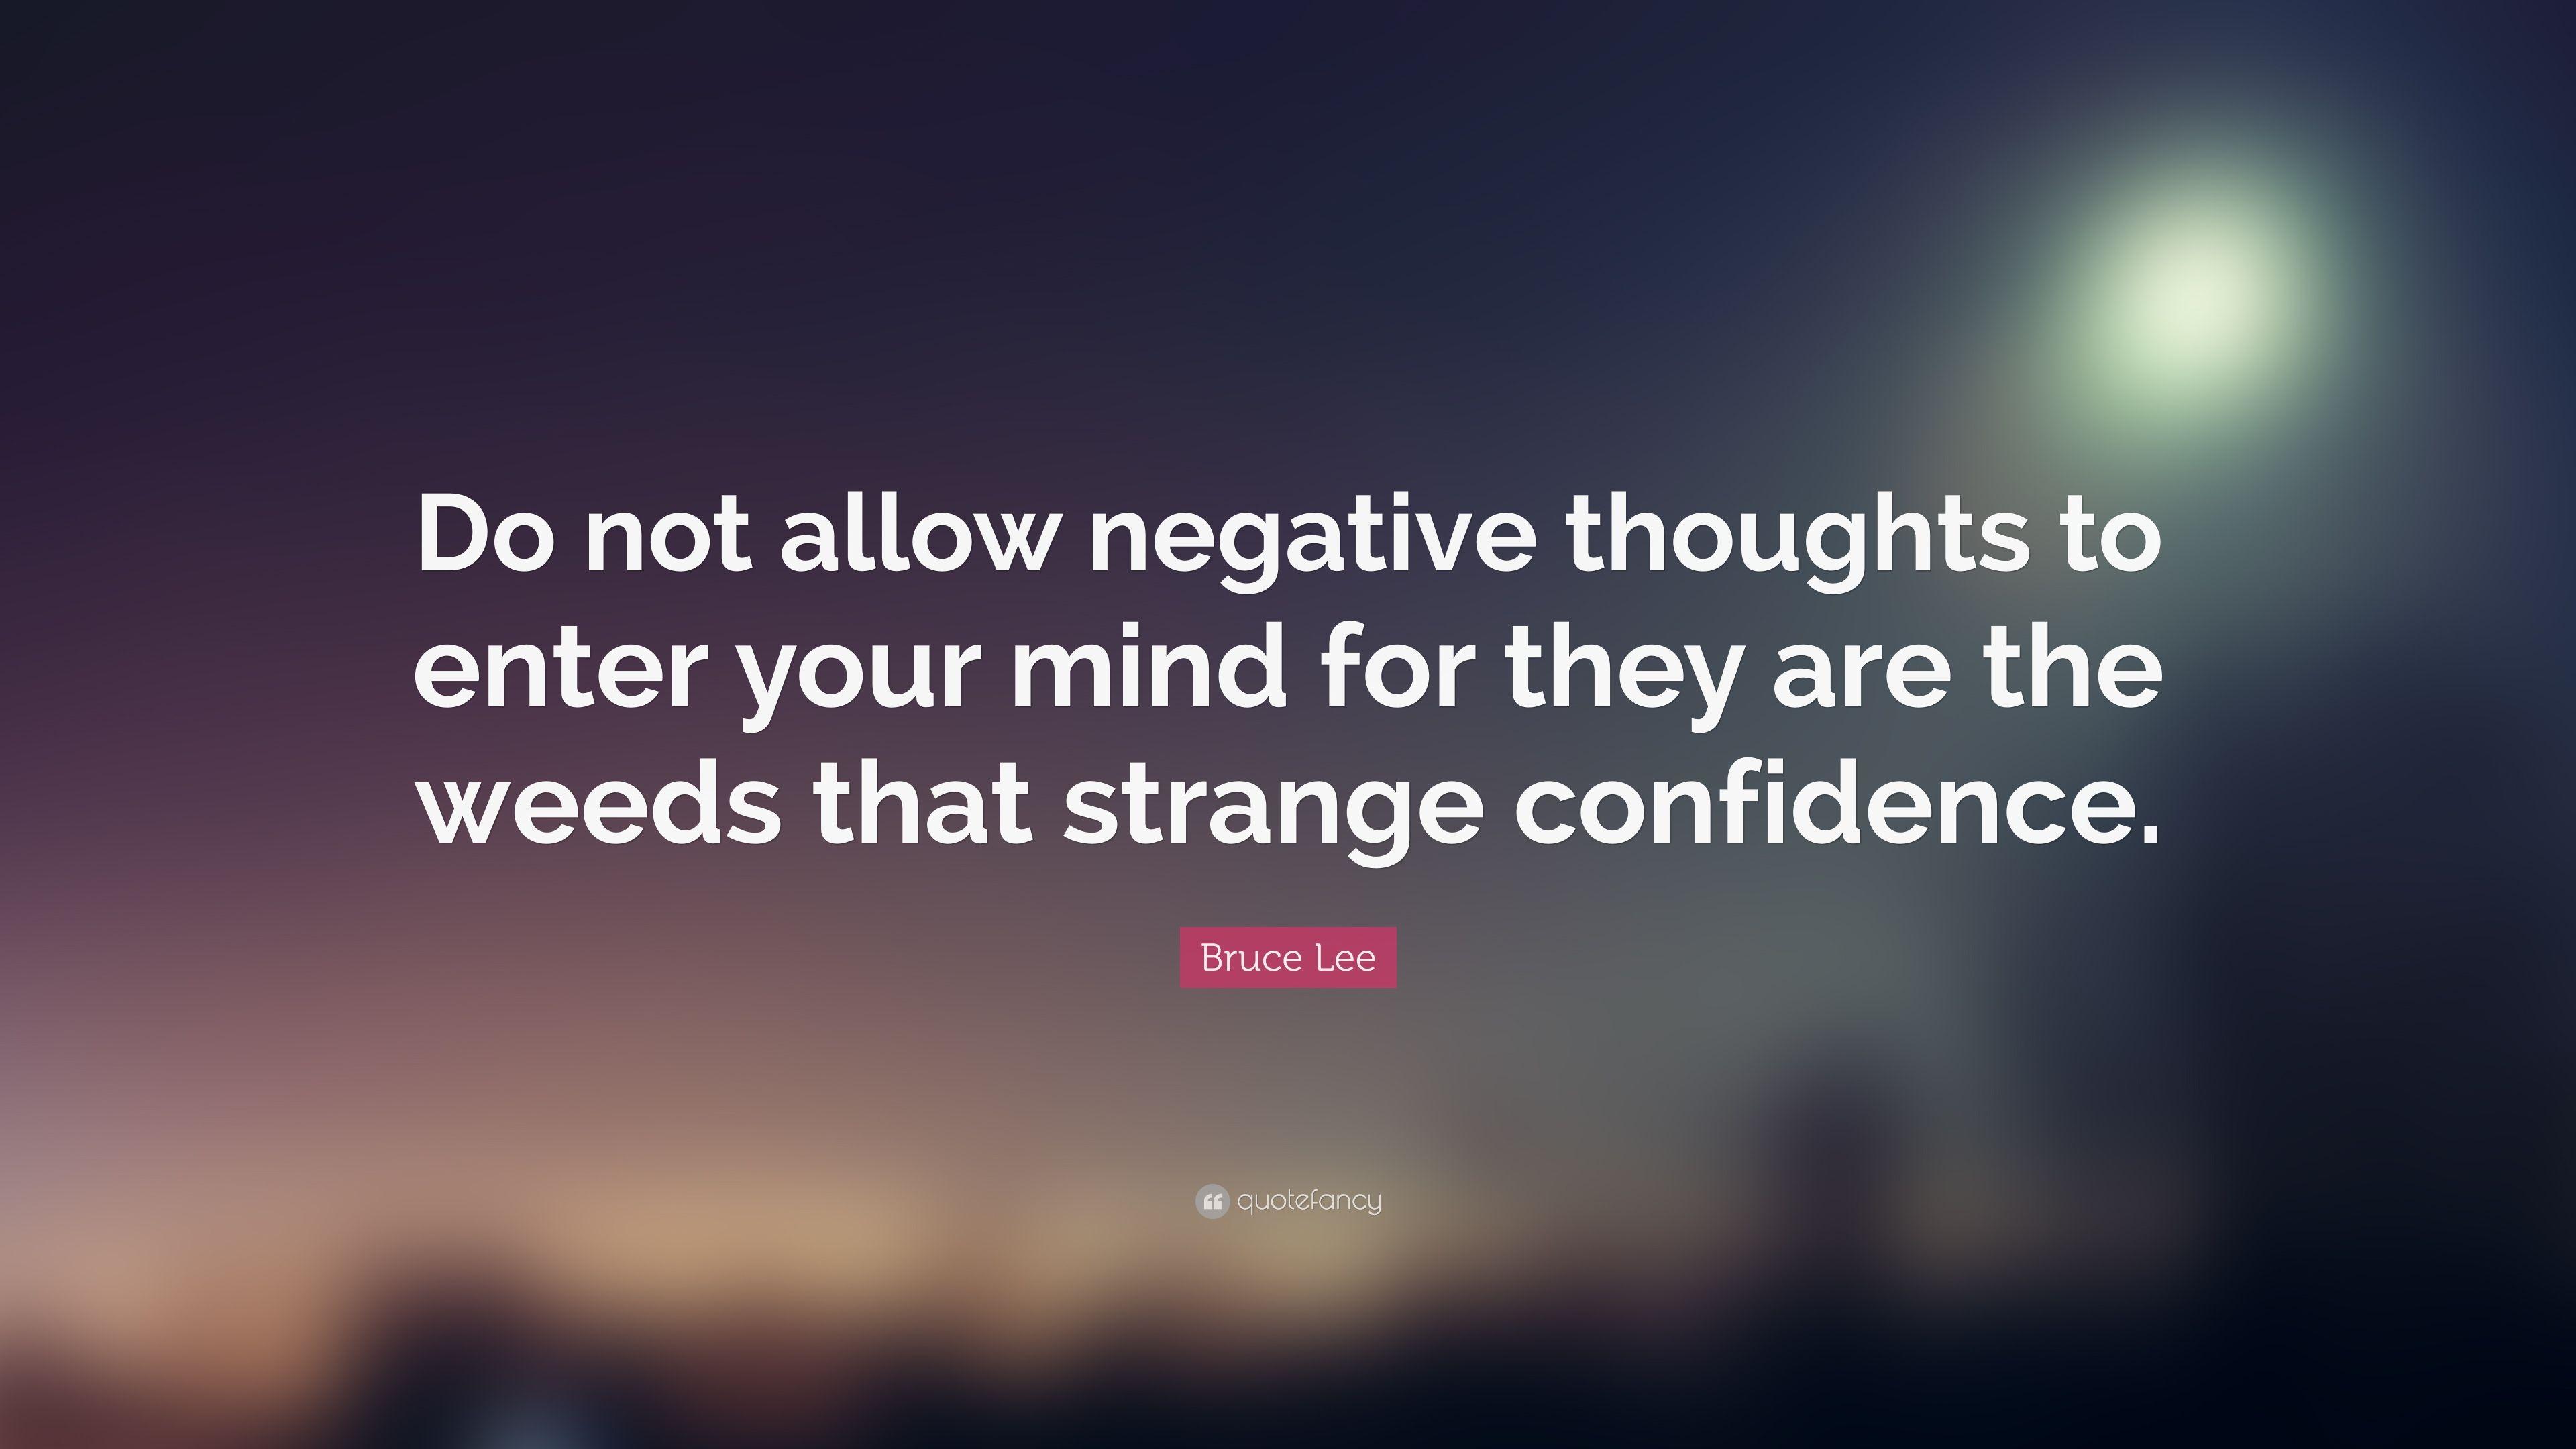 Bruce Lee Quote: “Do not allow negative thoughts to enter your mind